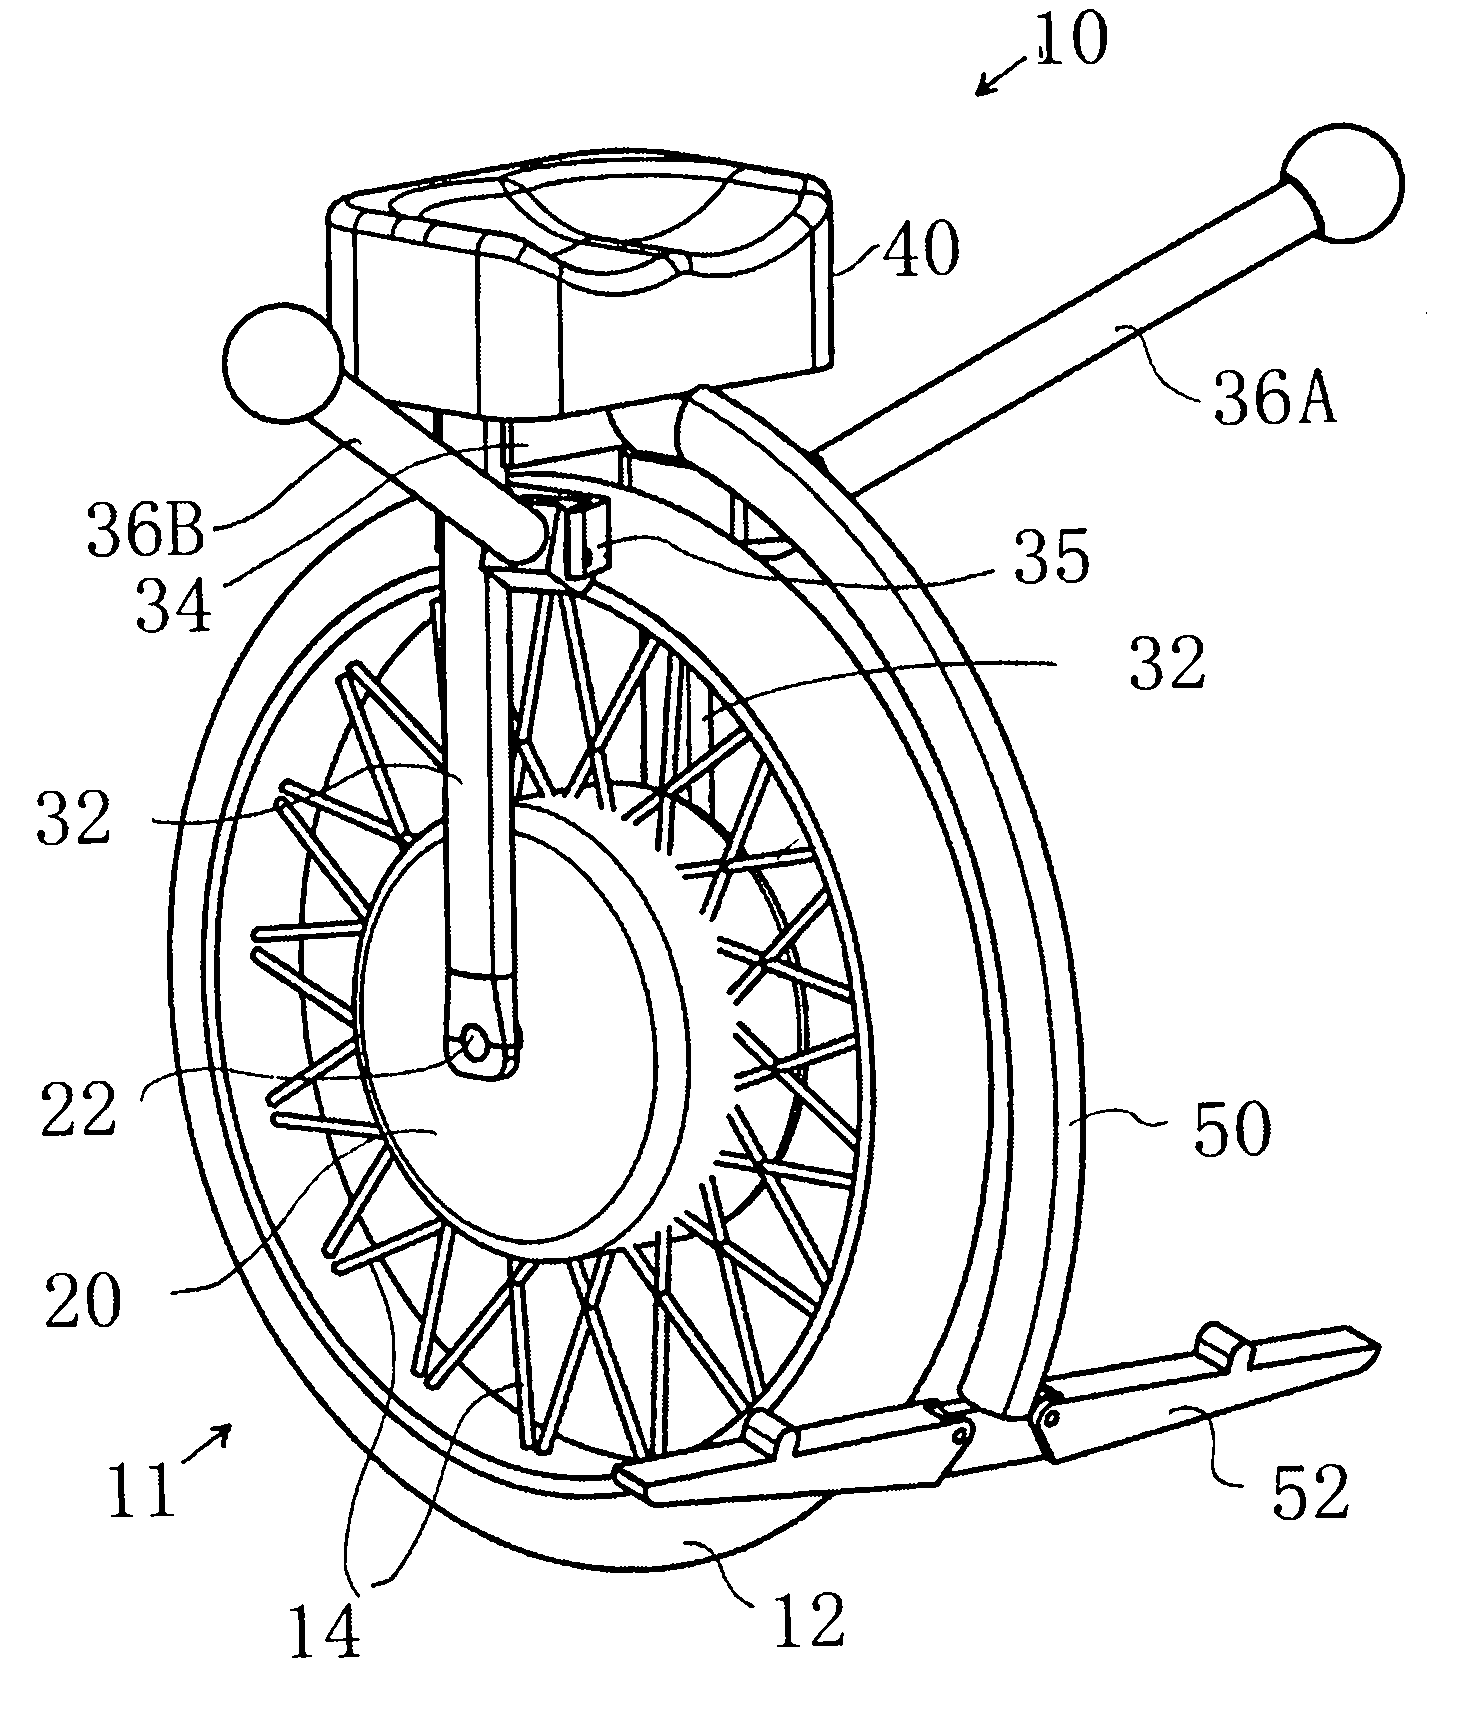 Power-driven unicycle